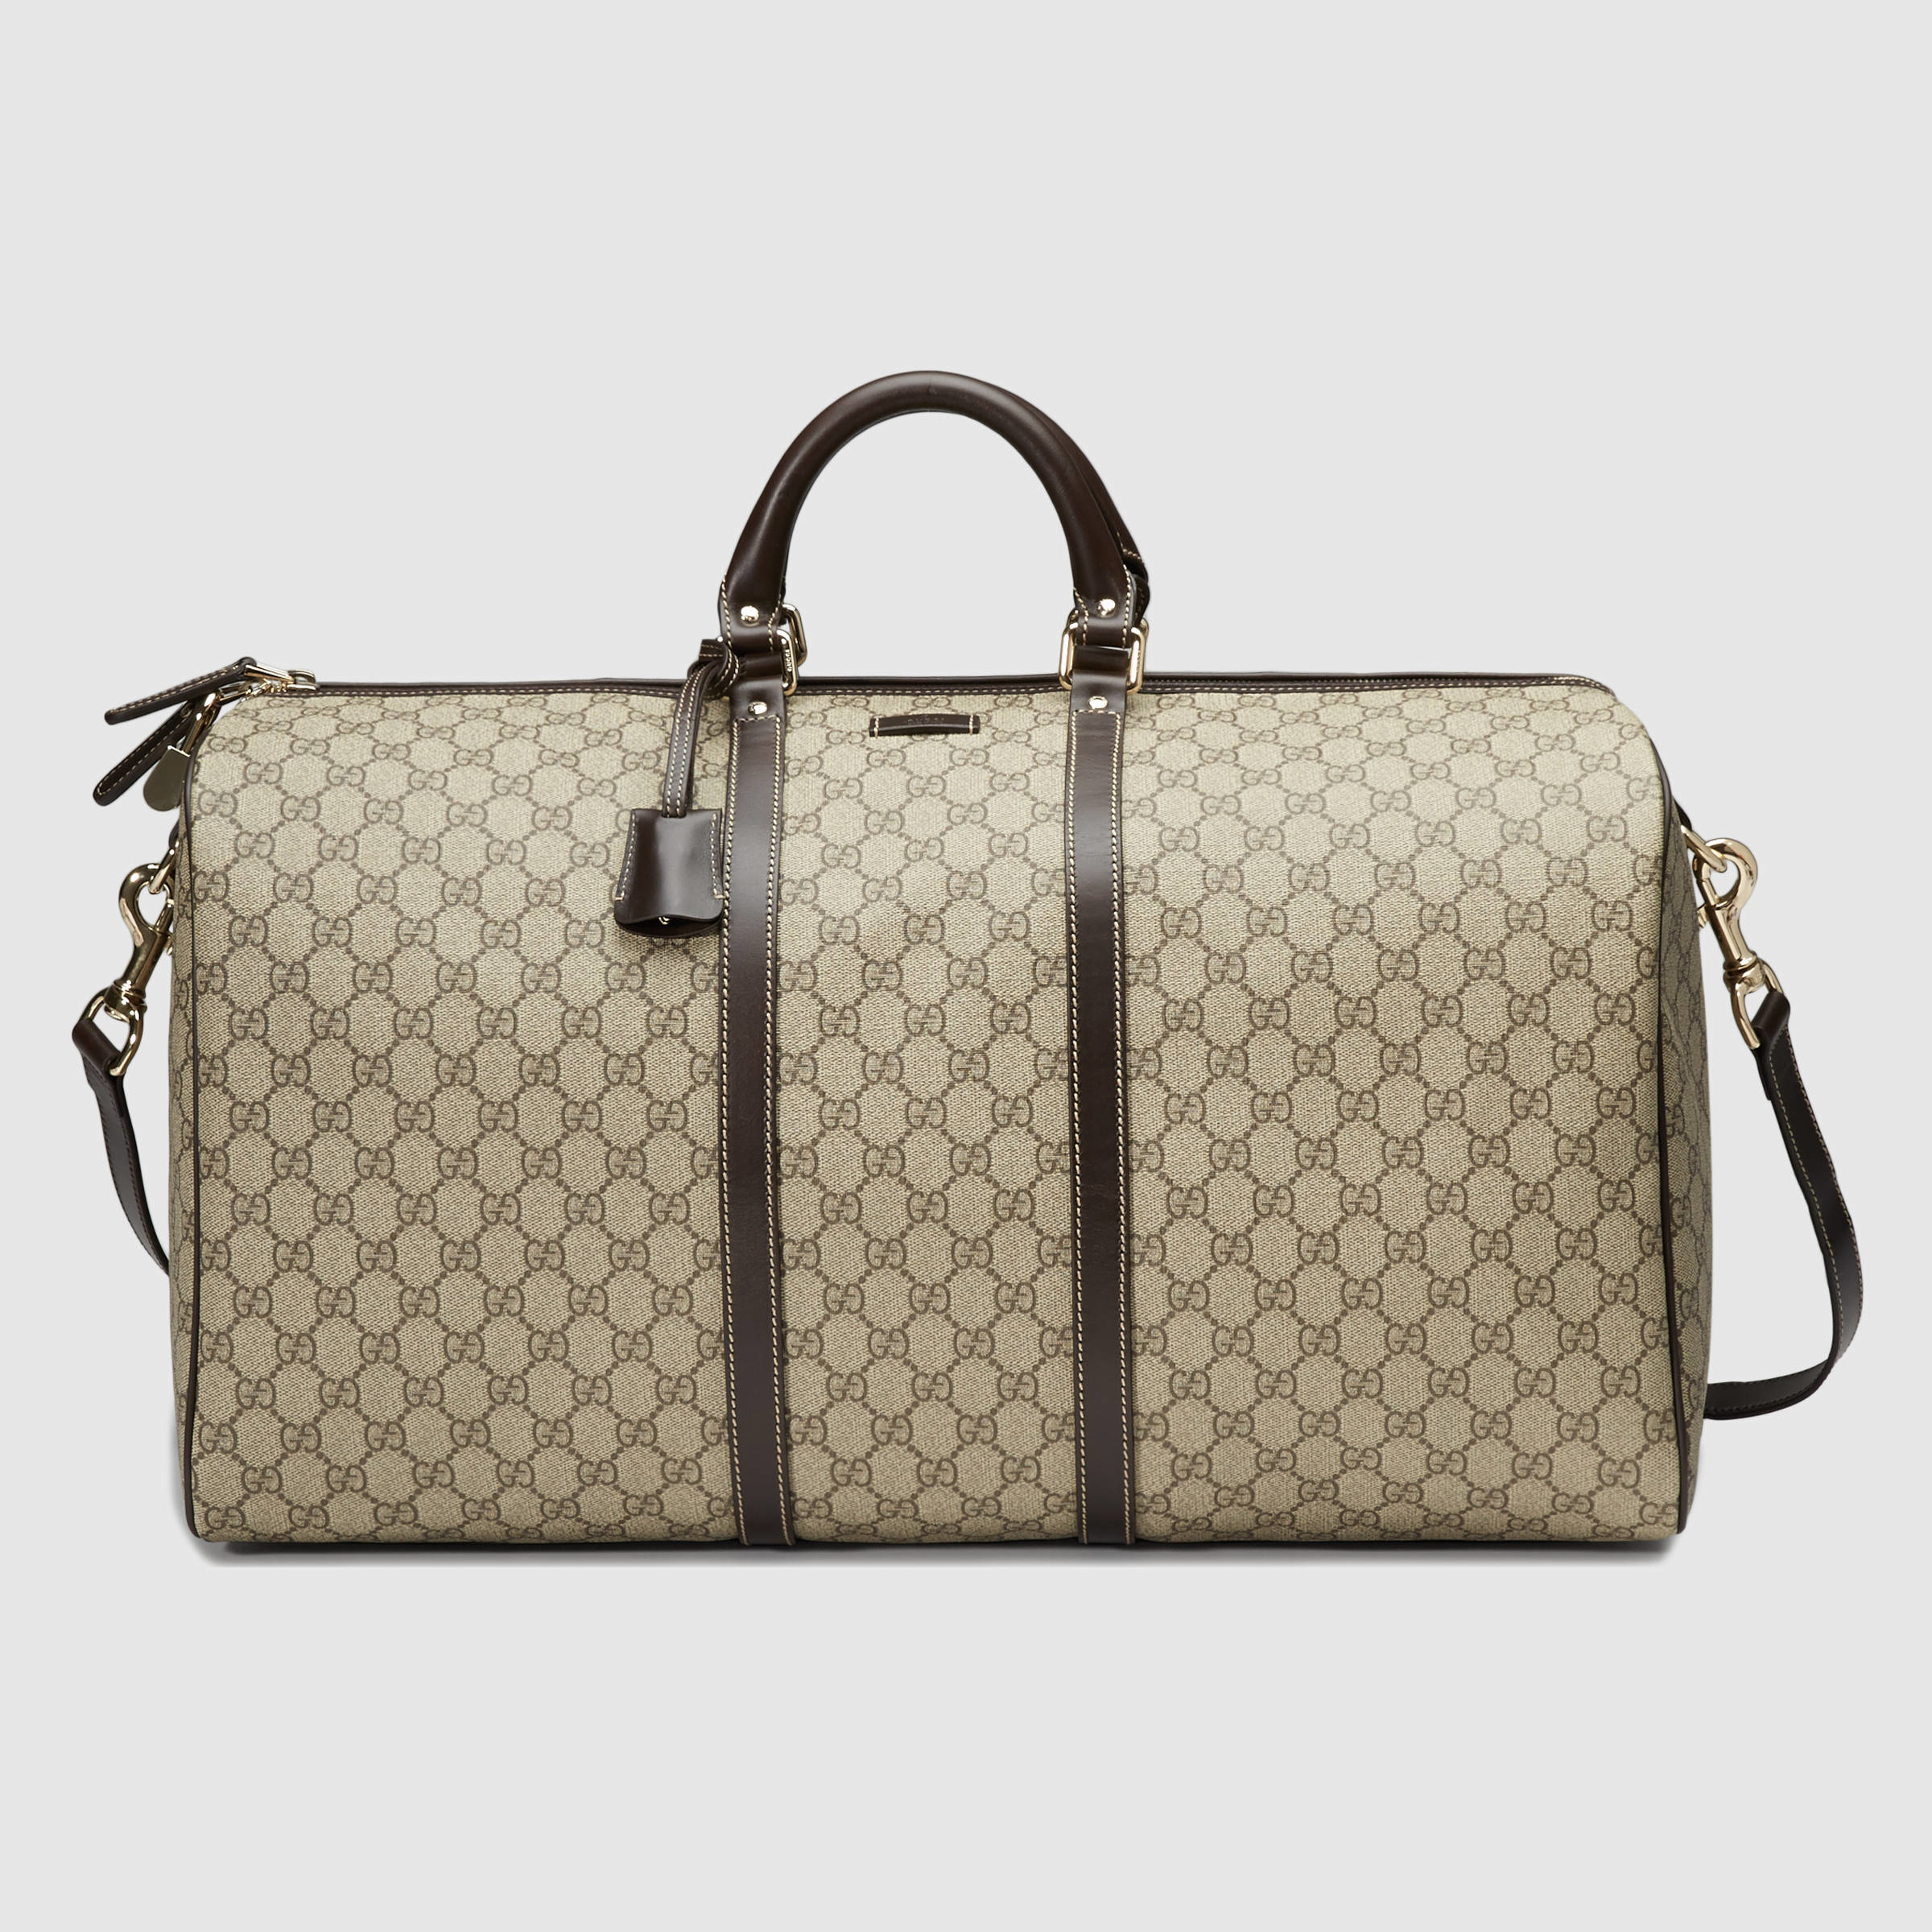 Lyst - Gucci Large Carry-on Duffle Bag in Natural for Men